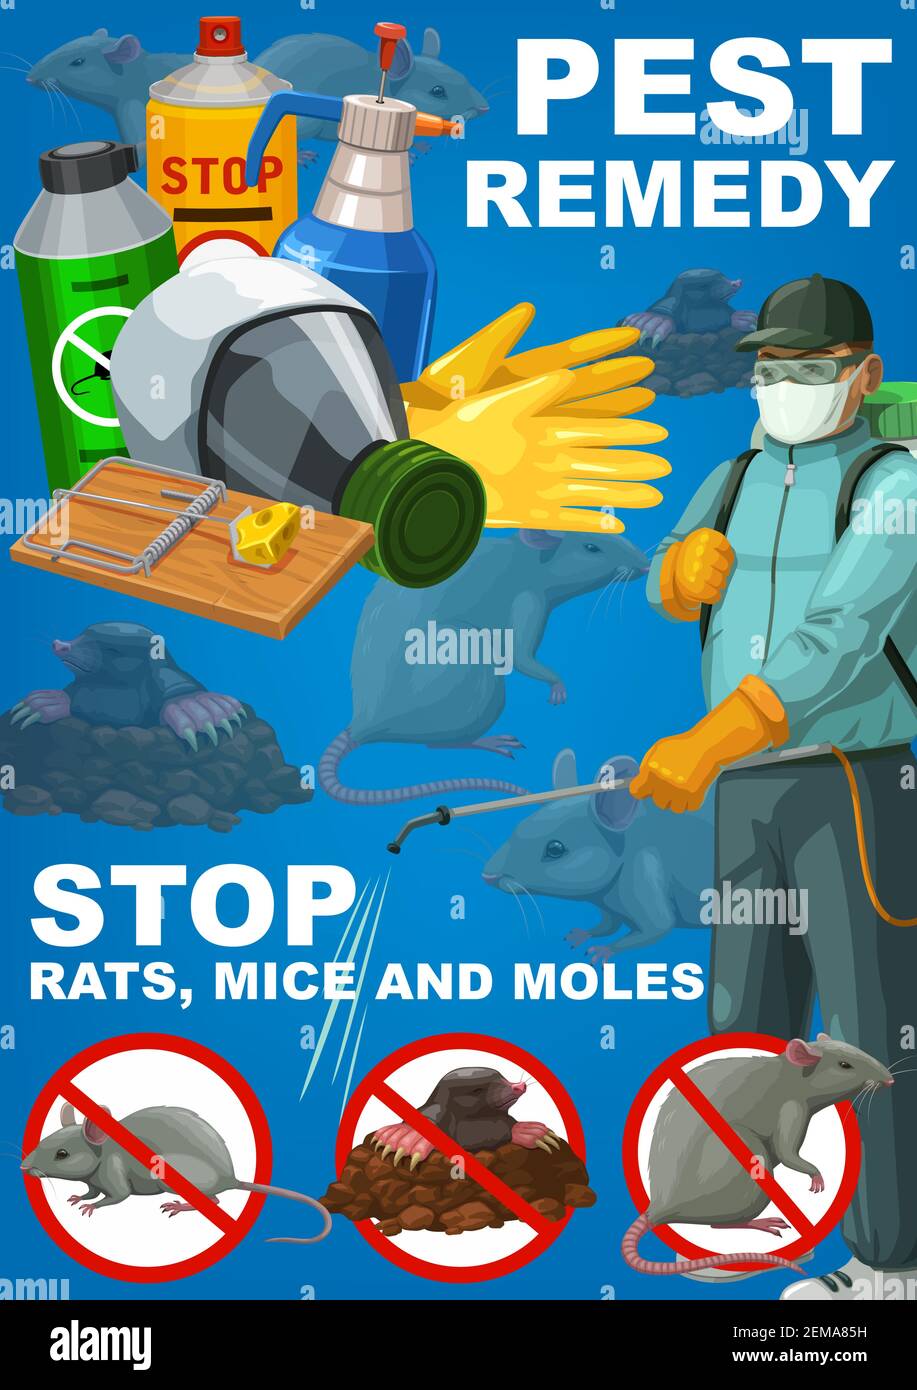 Pest remedy, rodents extermination, deratization sanitary control service vector poster. House rats, mice and moles pest control poison disinfection, Stock Vector